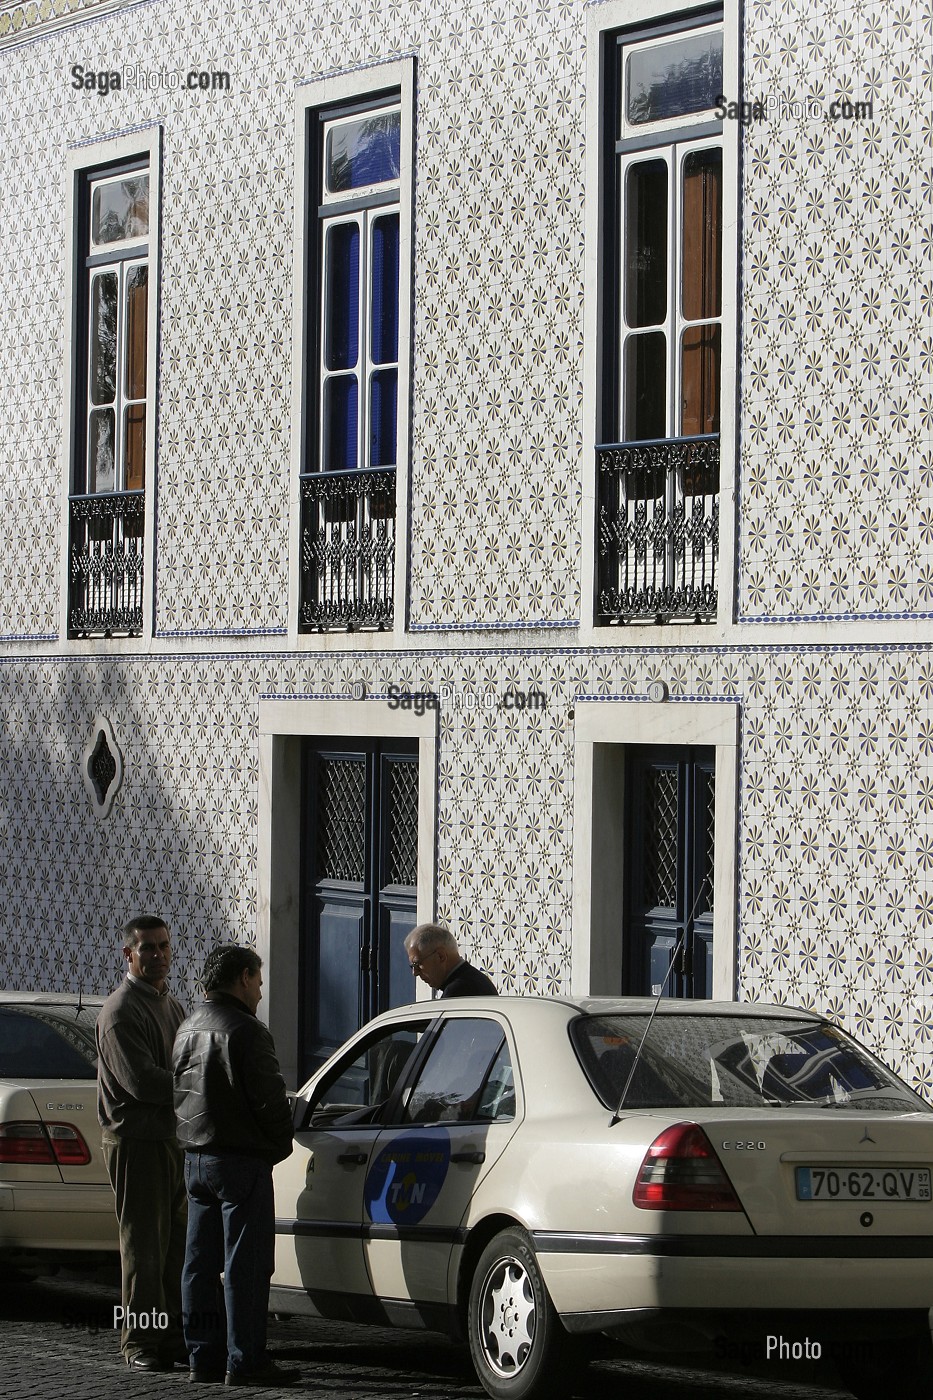 TAXI IN FRONT OF A FACADE IN AZULEJOS, TOWN OF BEJA, ALENTEJO, PORTUGAL 